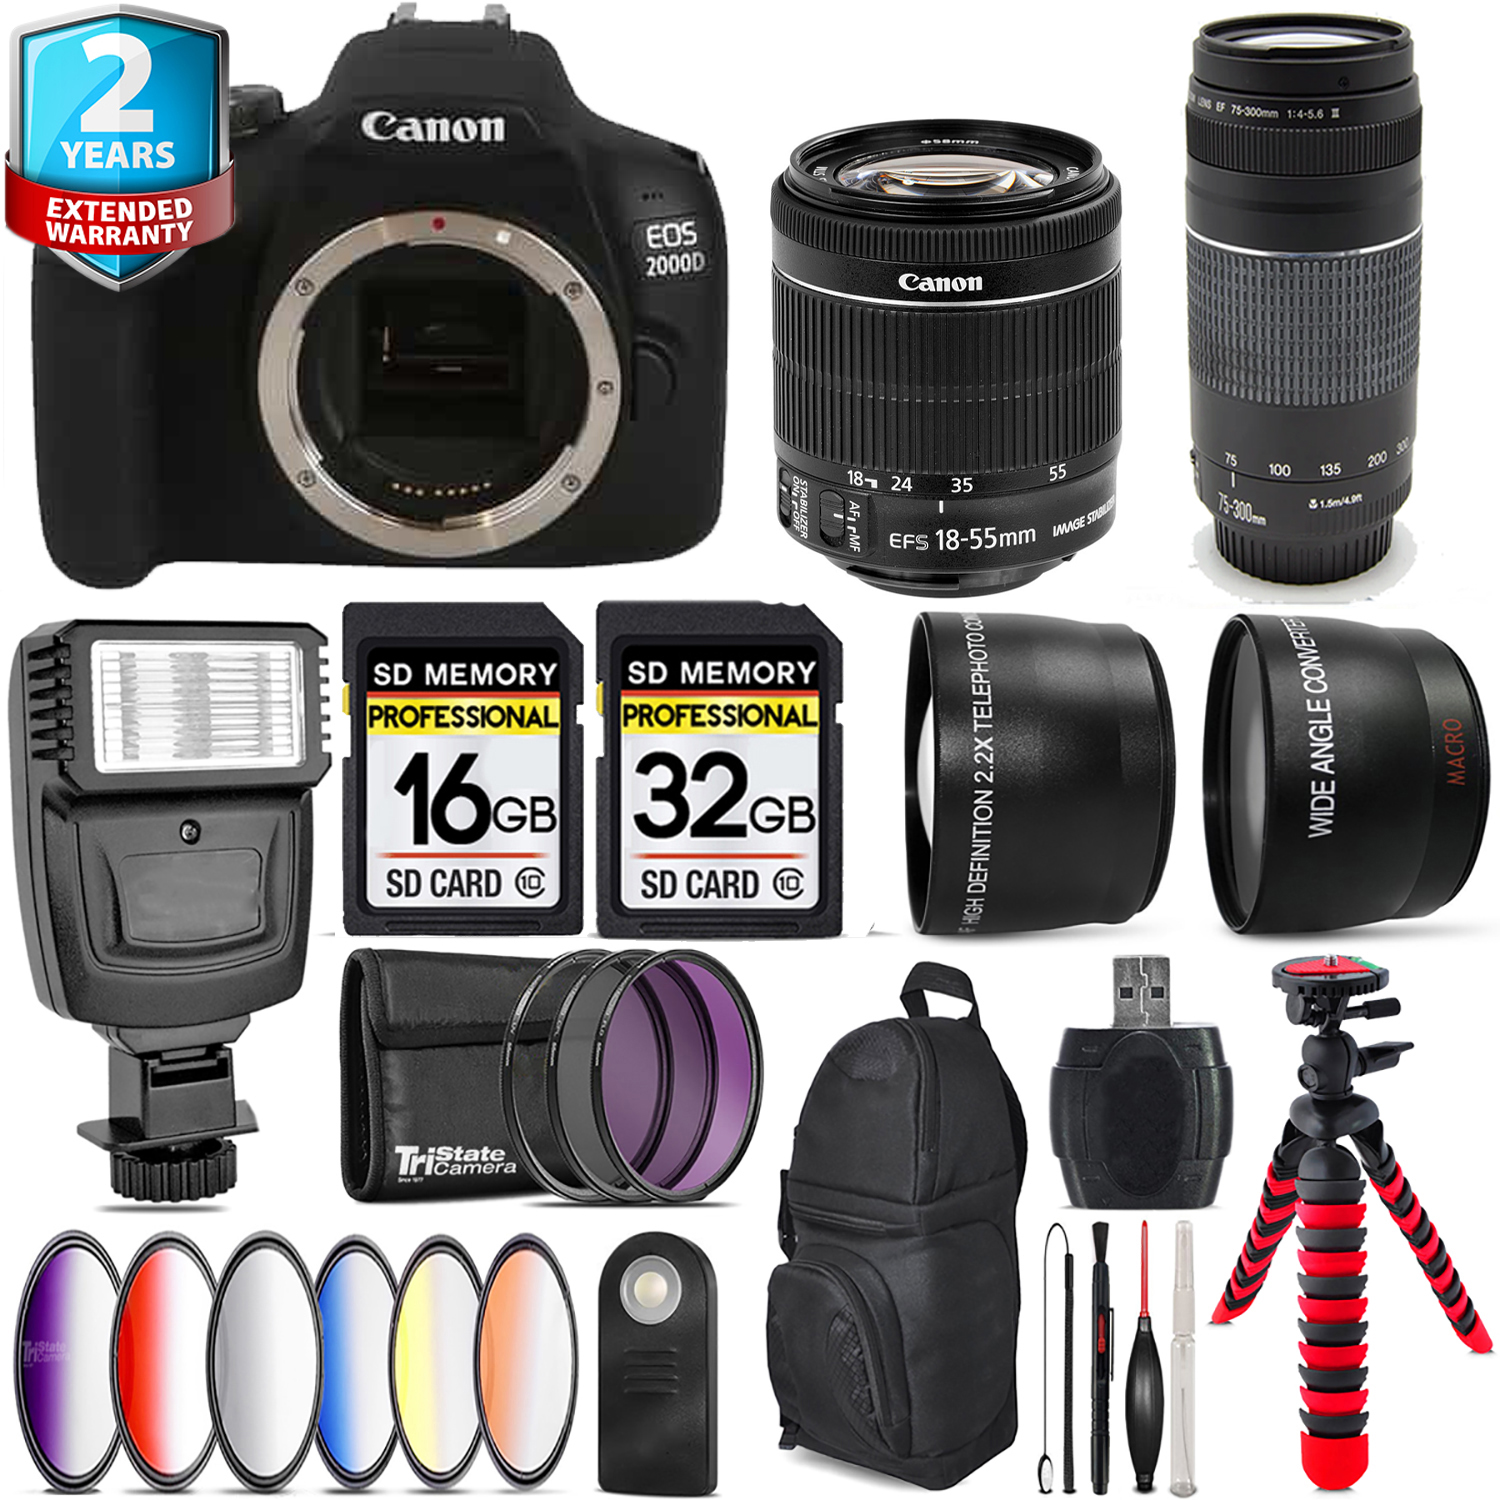 EOS 2000D (Rebel T7) + 18-55mm IS STM + 75- 300mm III + Slave Flash - 48GB Kit *FREE SHIPPING*